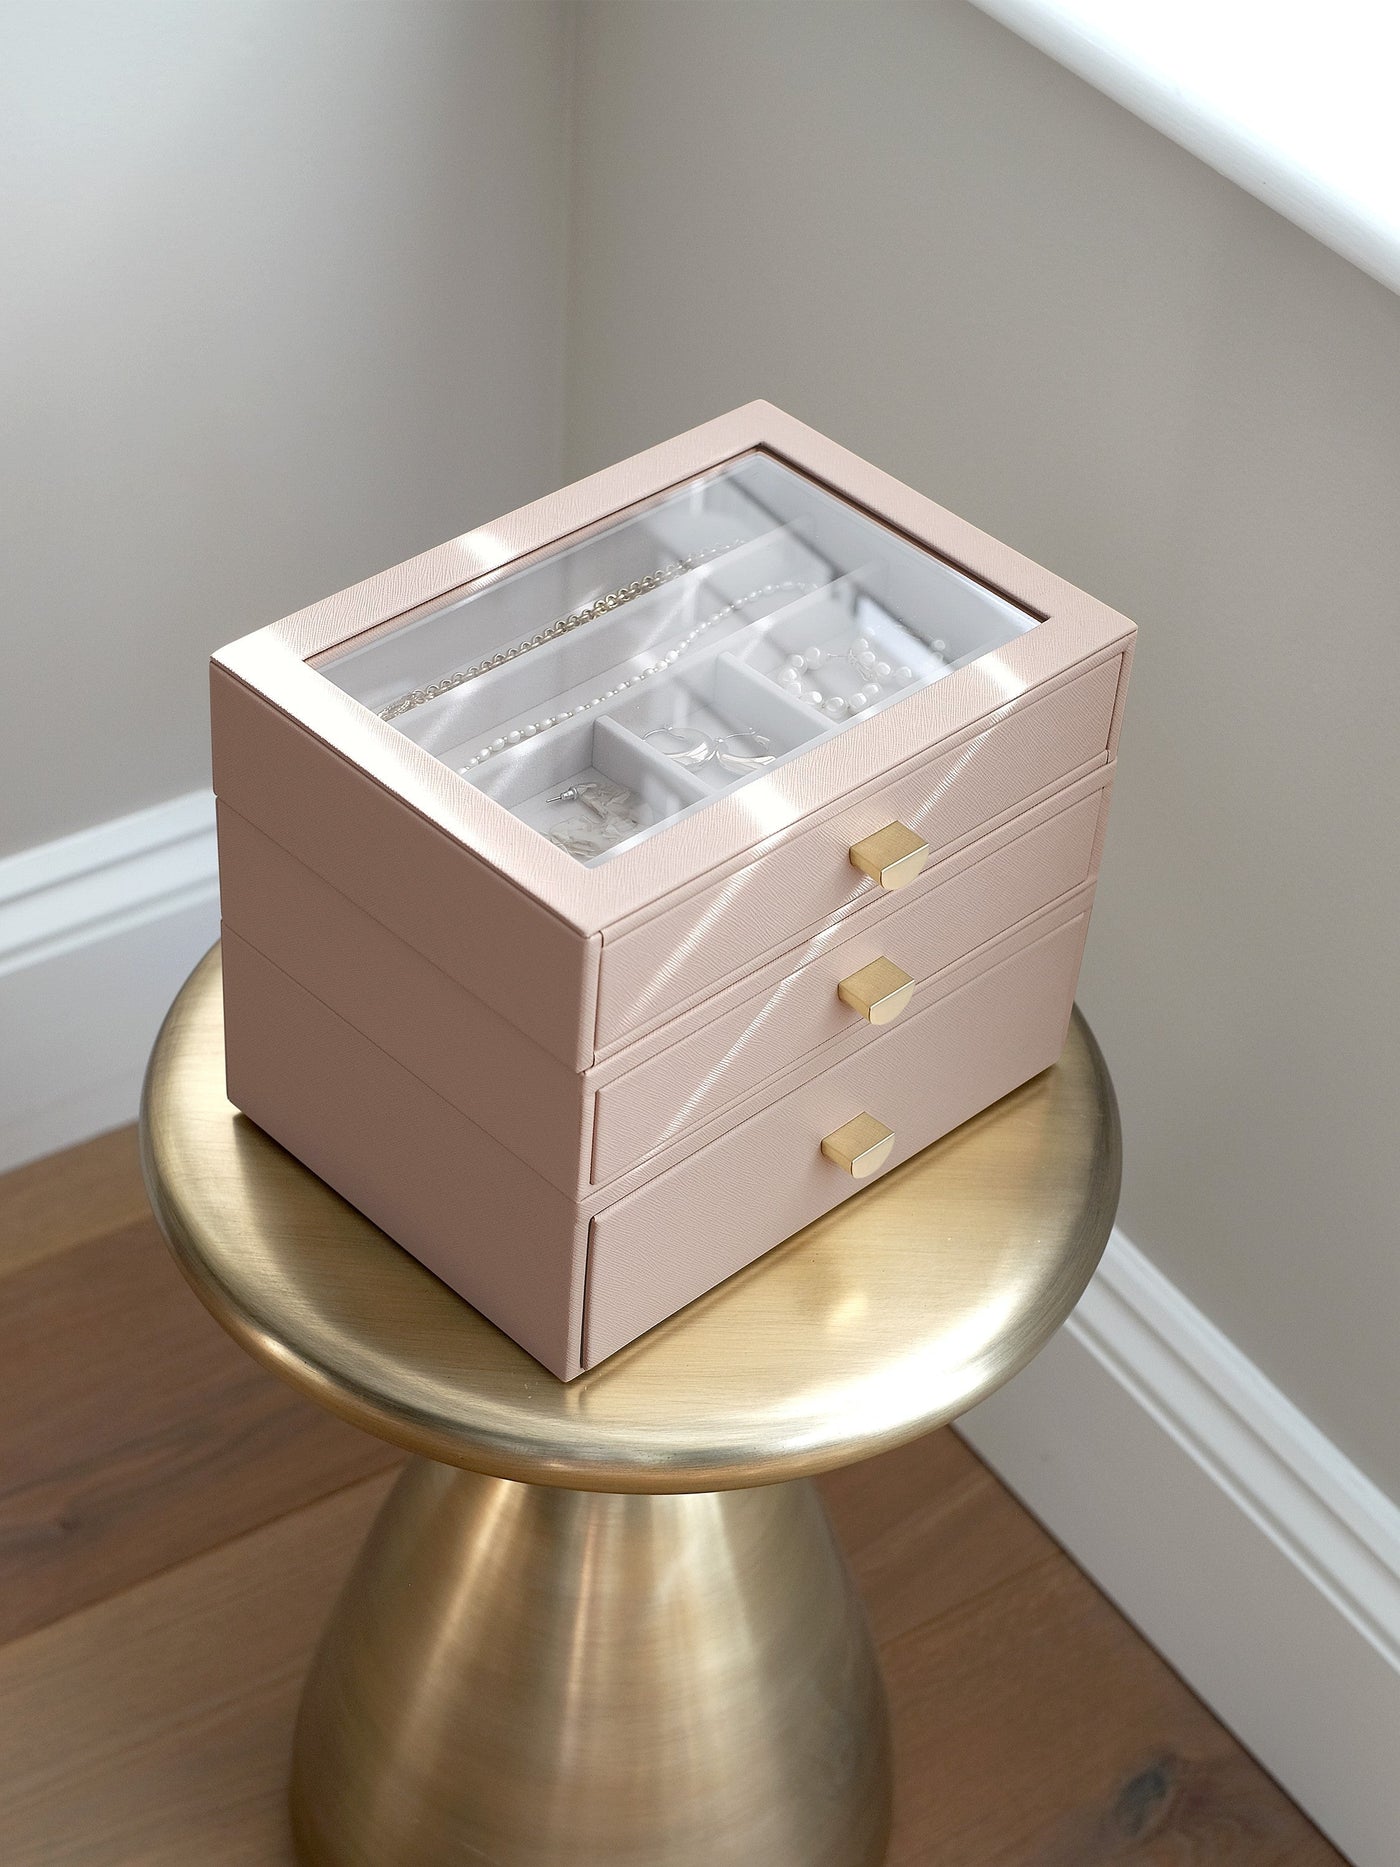 Stackers. Blush Pink Classic Jewellery Box - Set of 3 (with drawers) - timeframedclocks